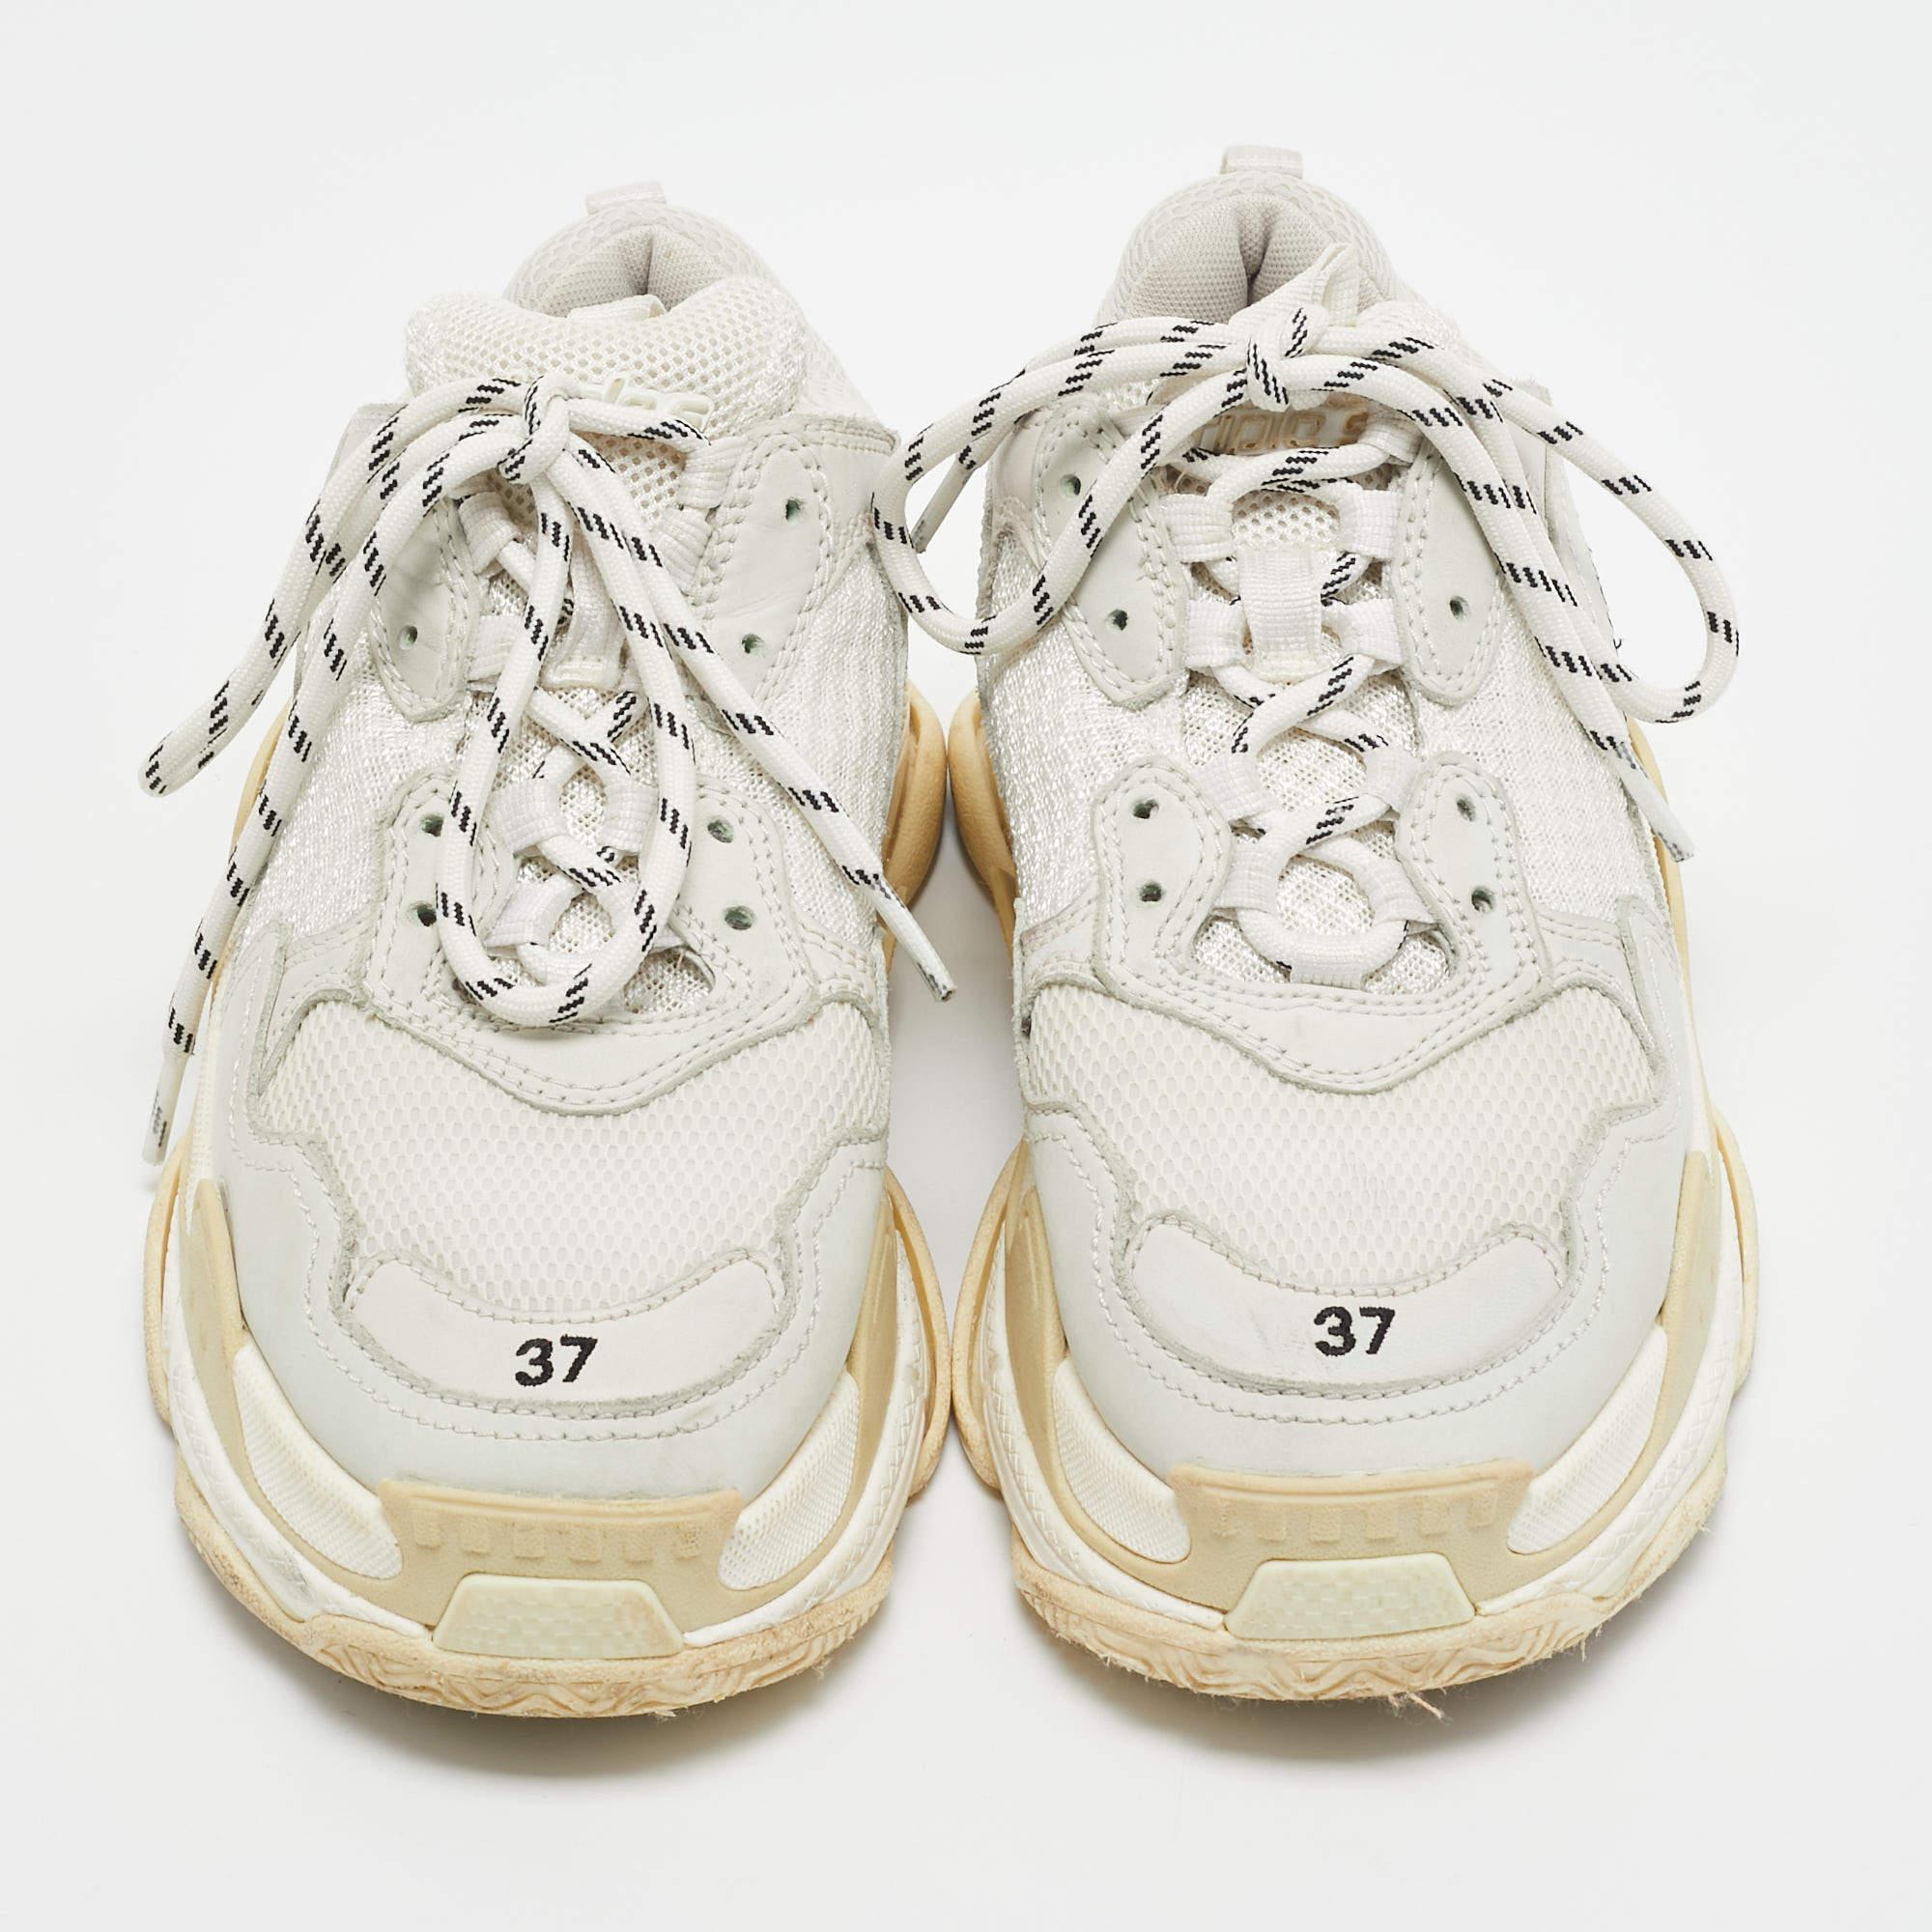 Balenciaga White/Grey Mesh and Leather Triple S Sneakers Size 37 For Sale 1